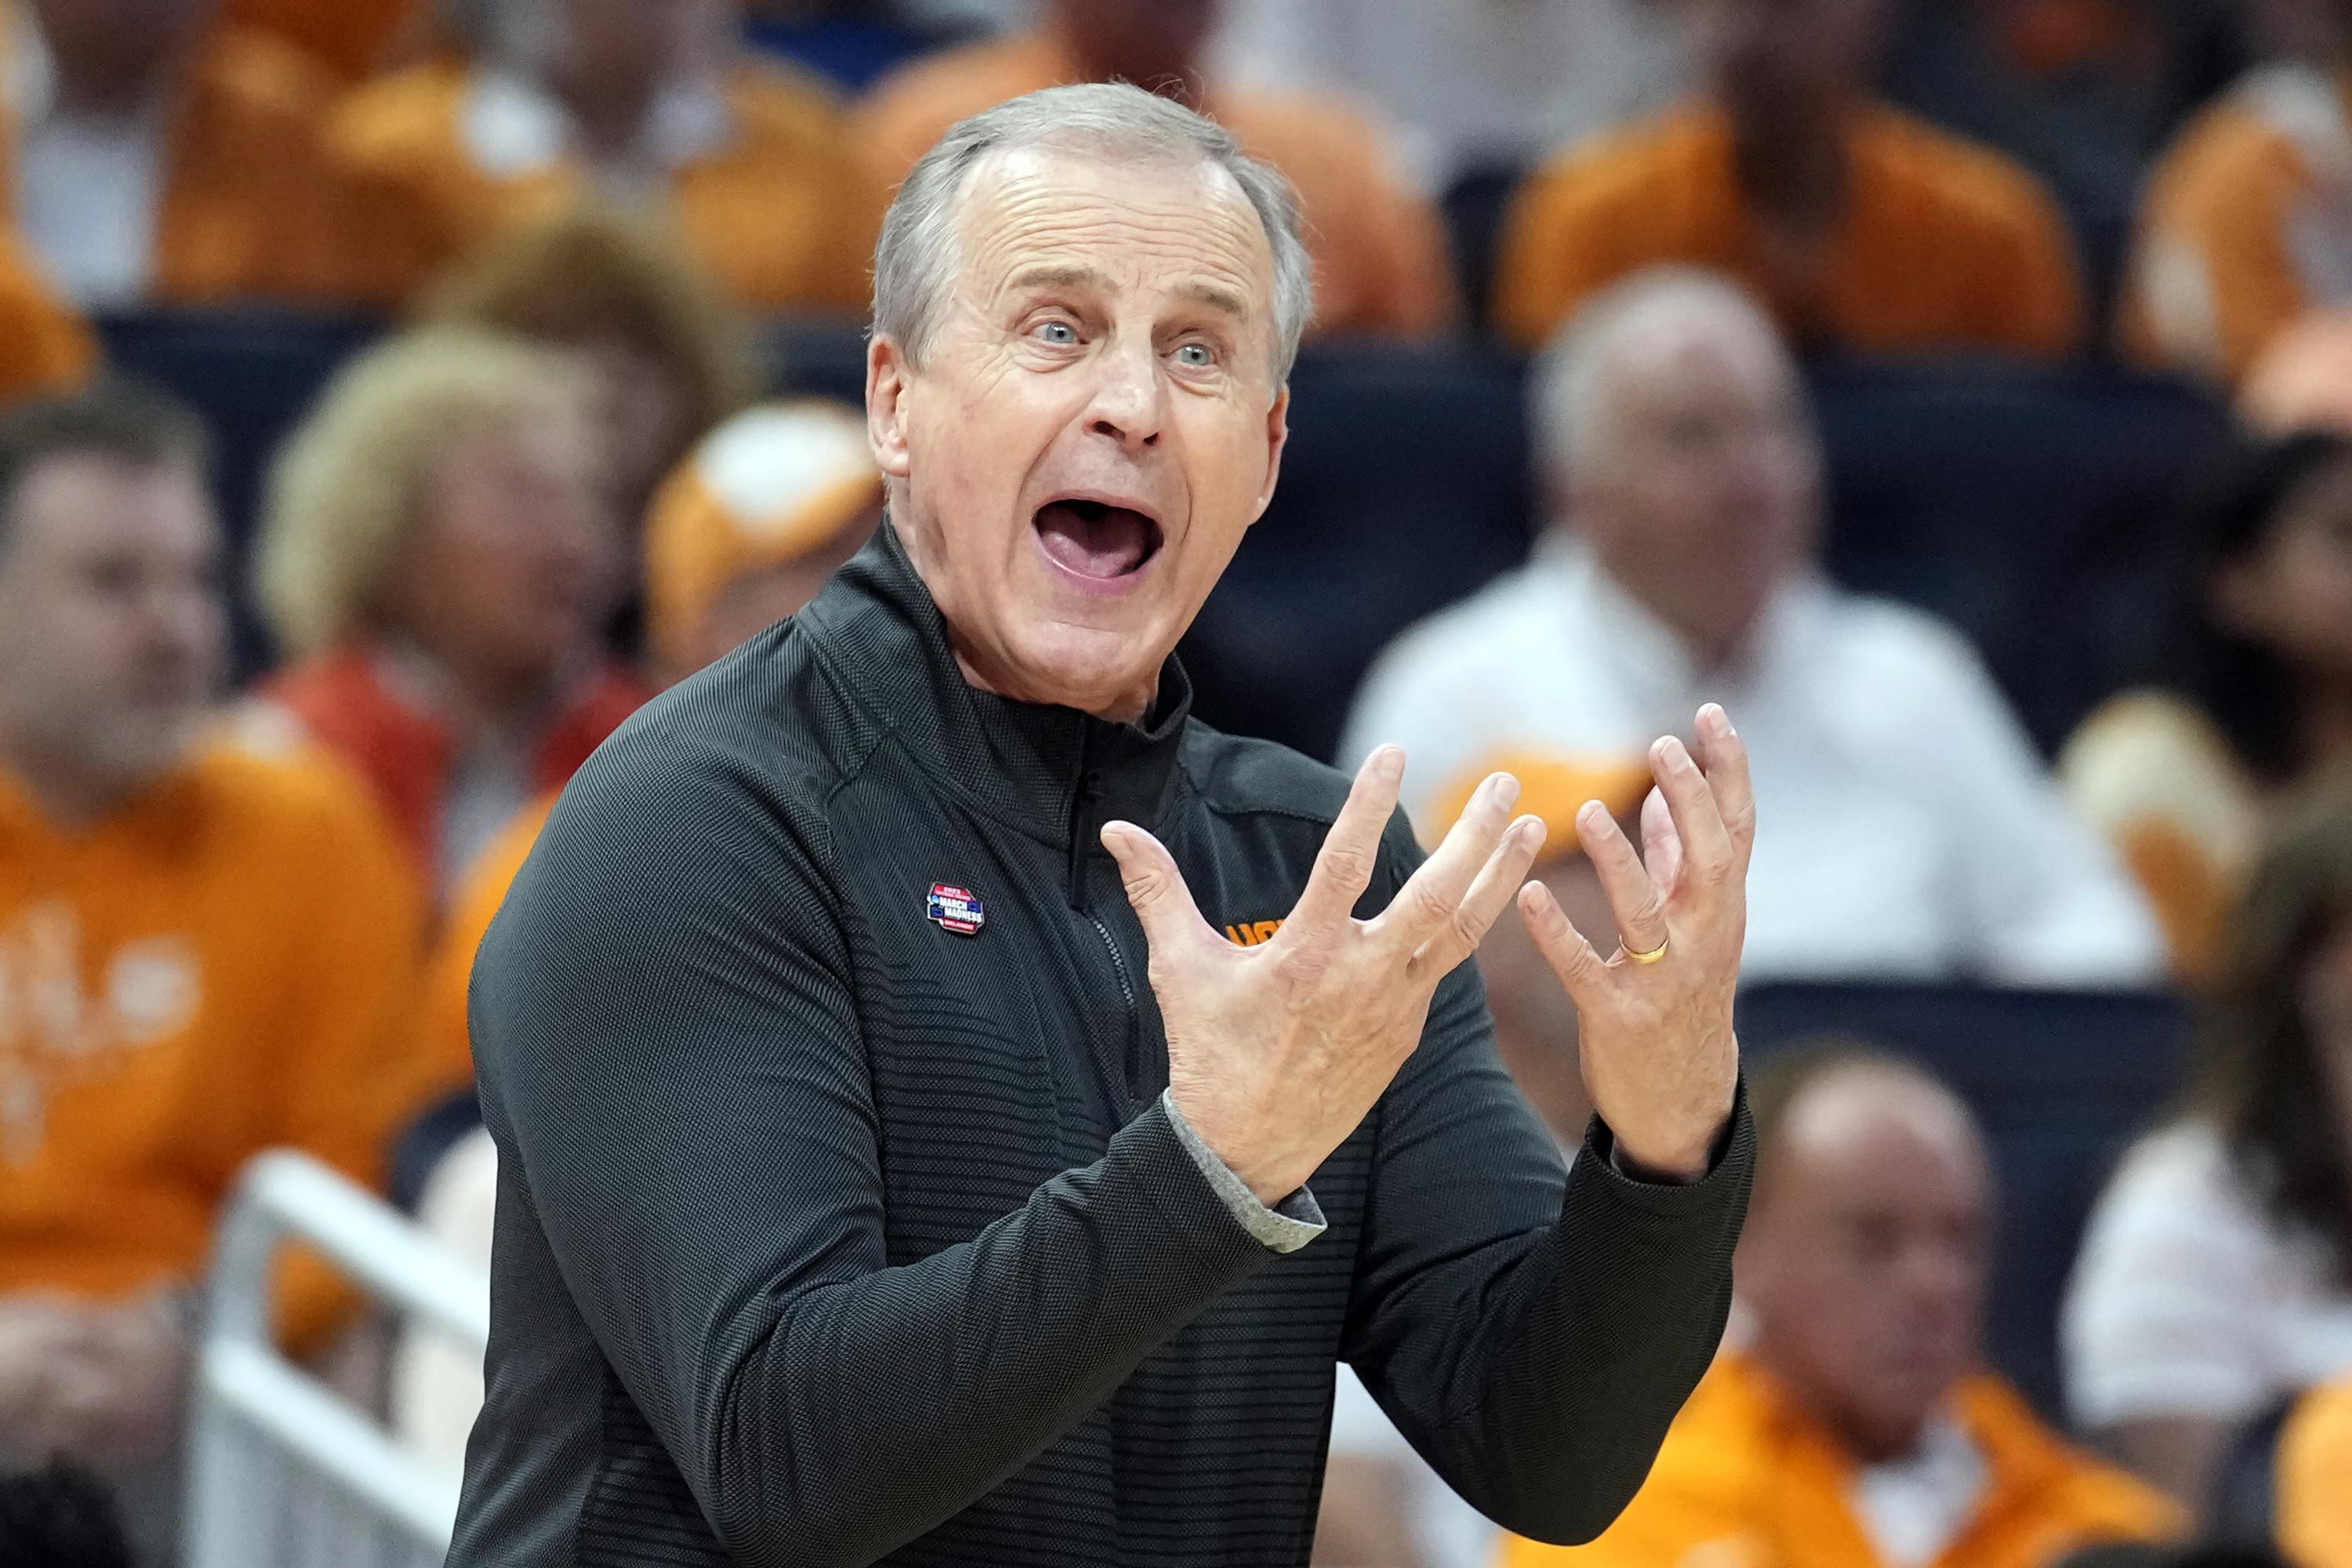 March Madness allows the Vols to showcase the SEC’s rugged style